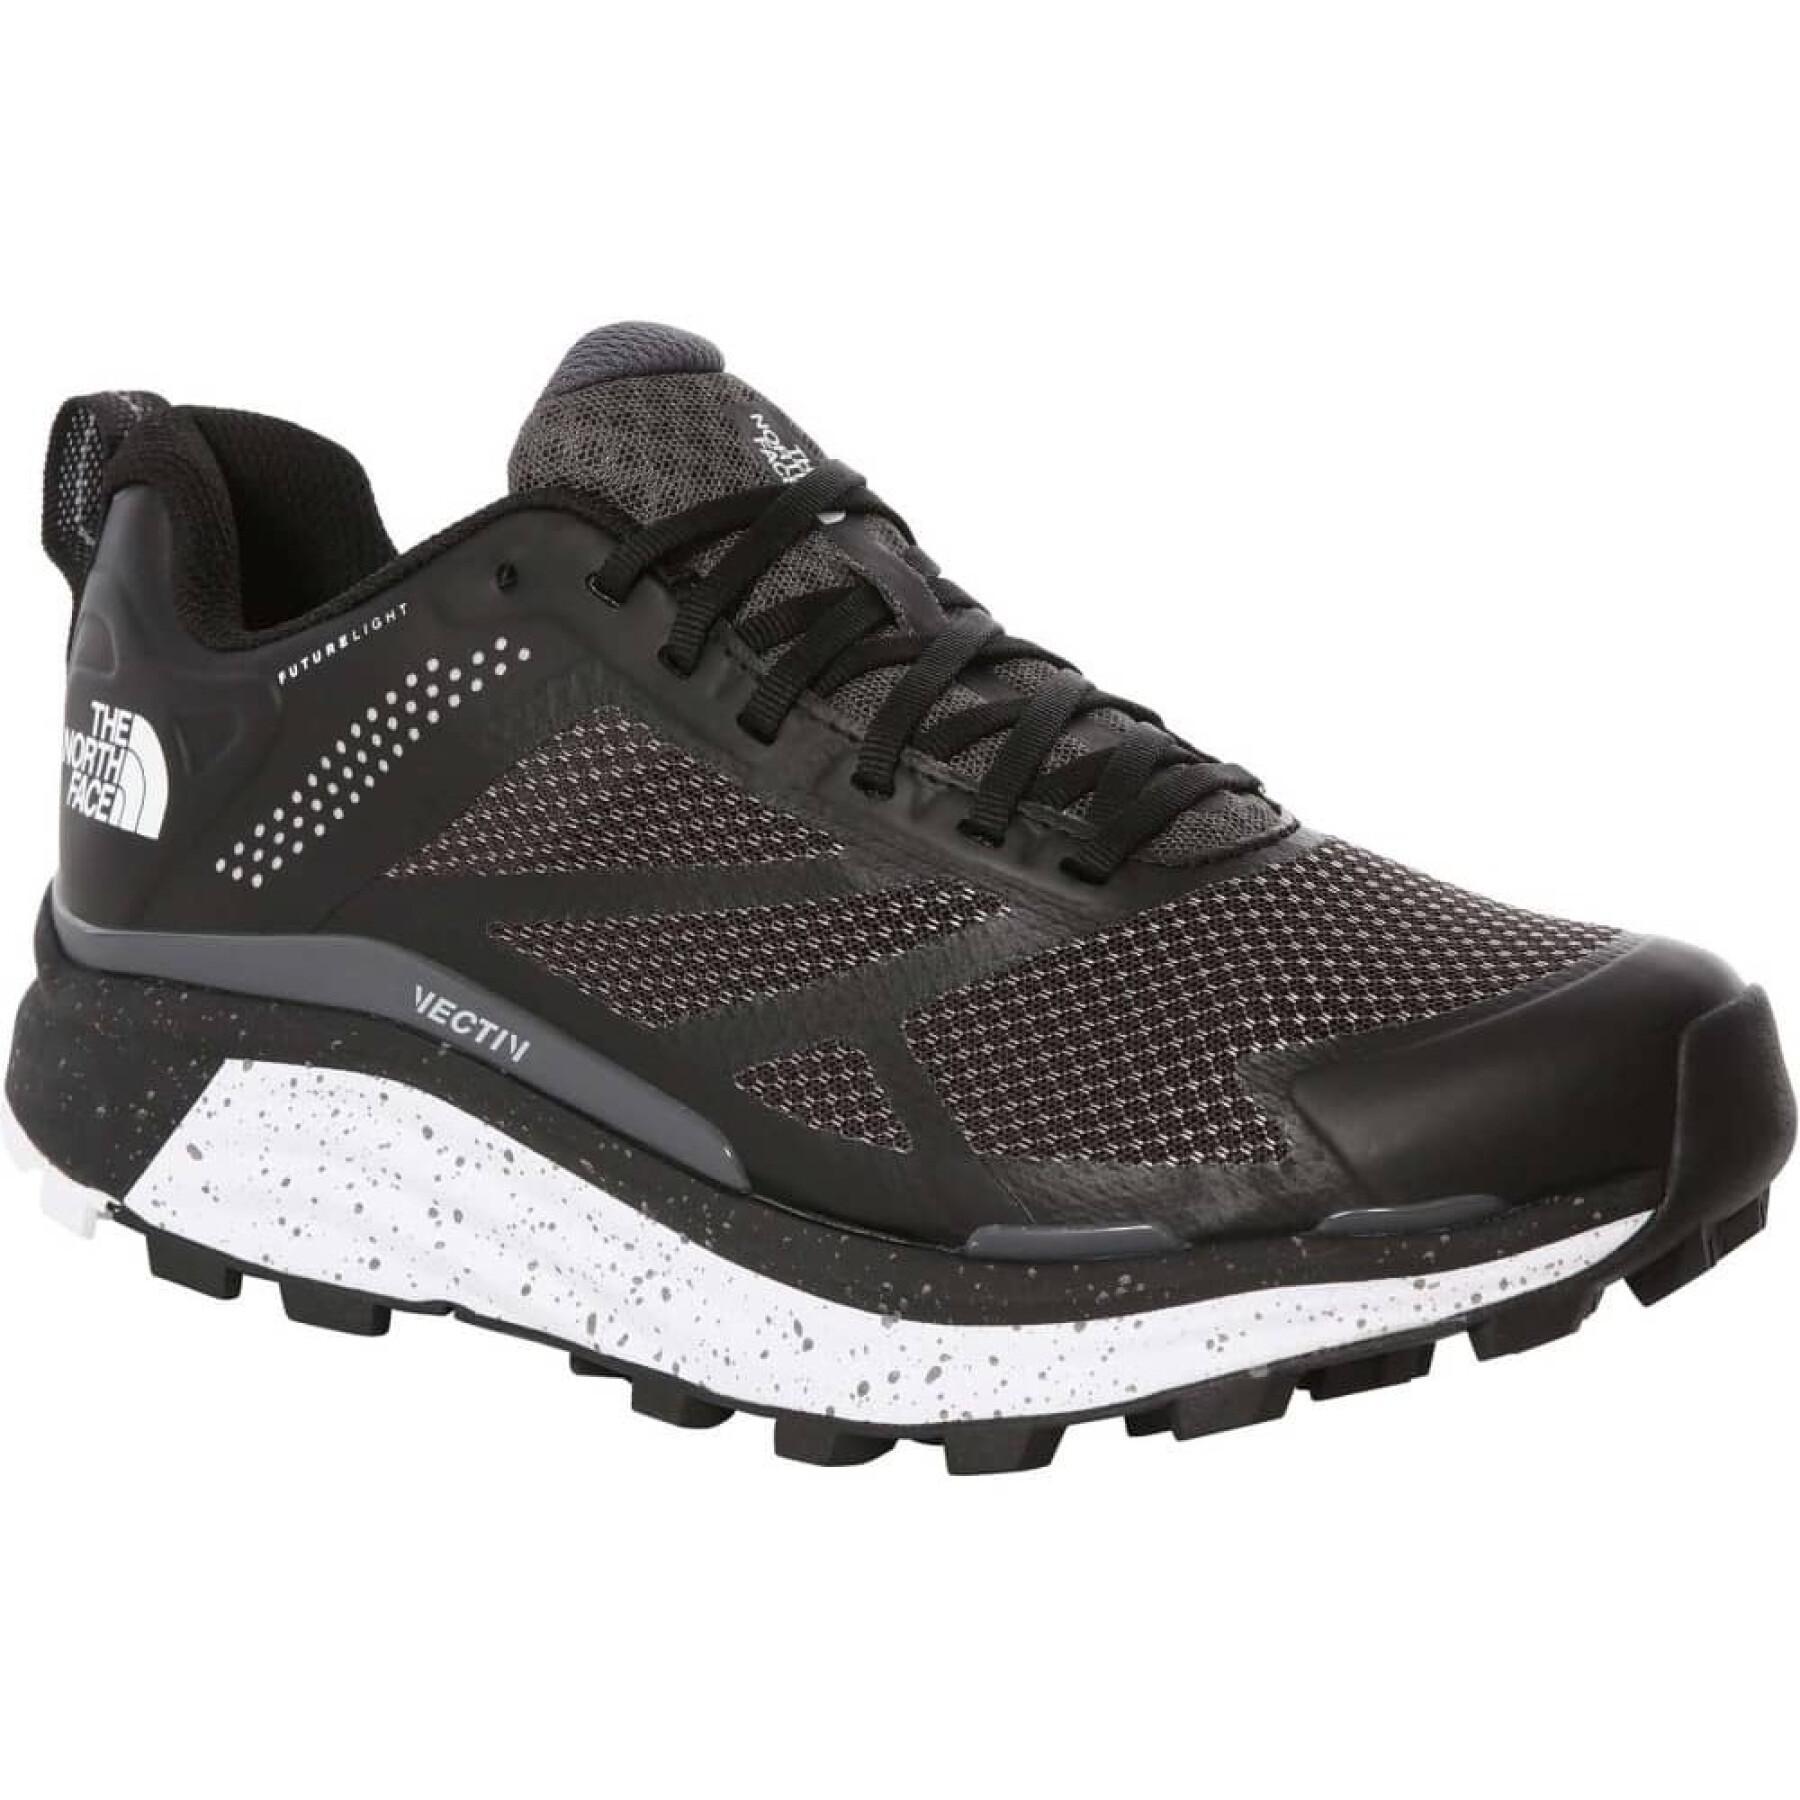 Women's Trail running shoes The North Face Vectiv enduris futureLight™ reflect